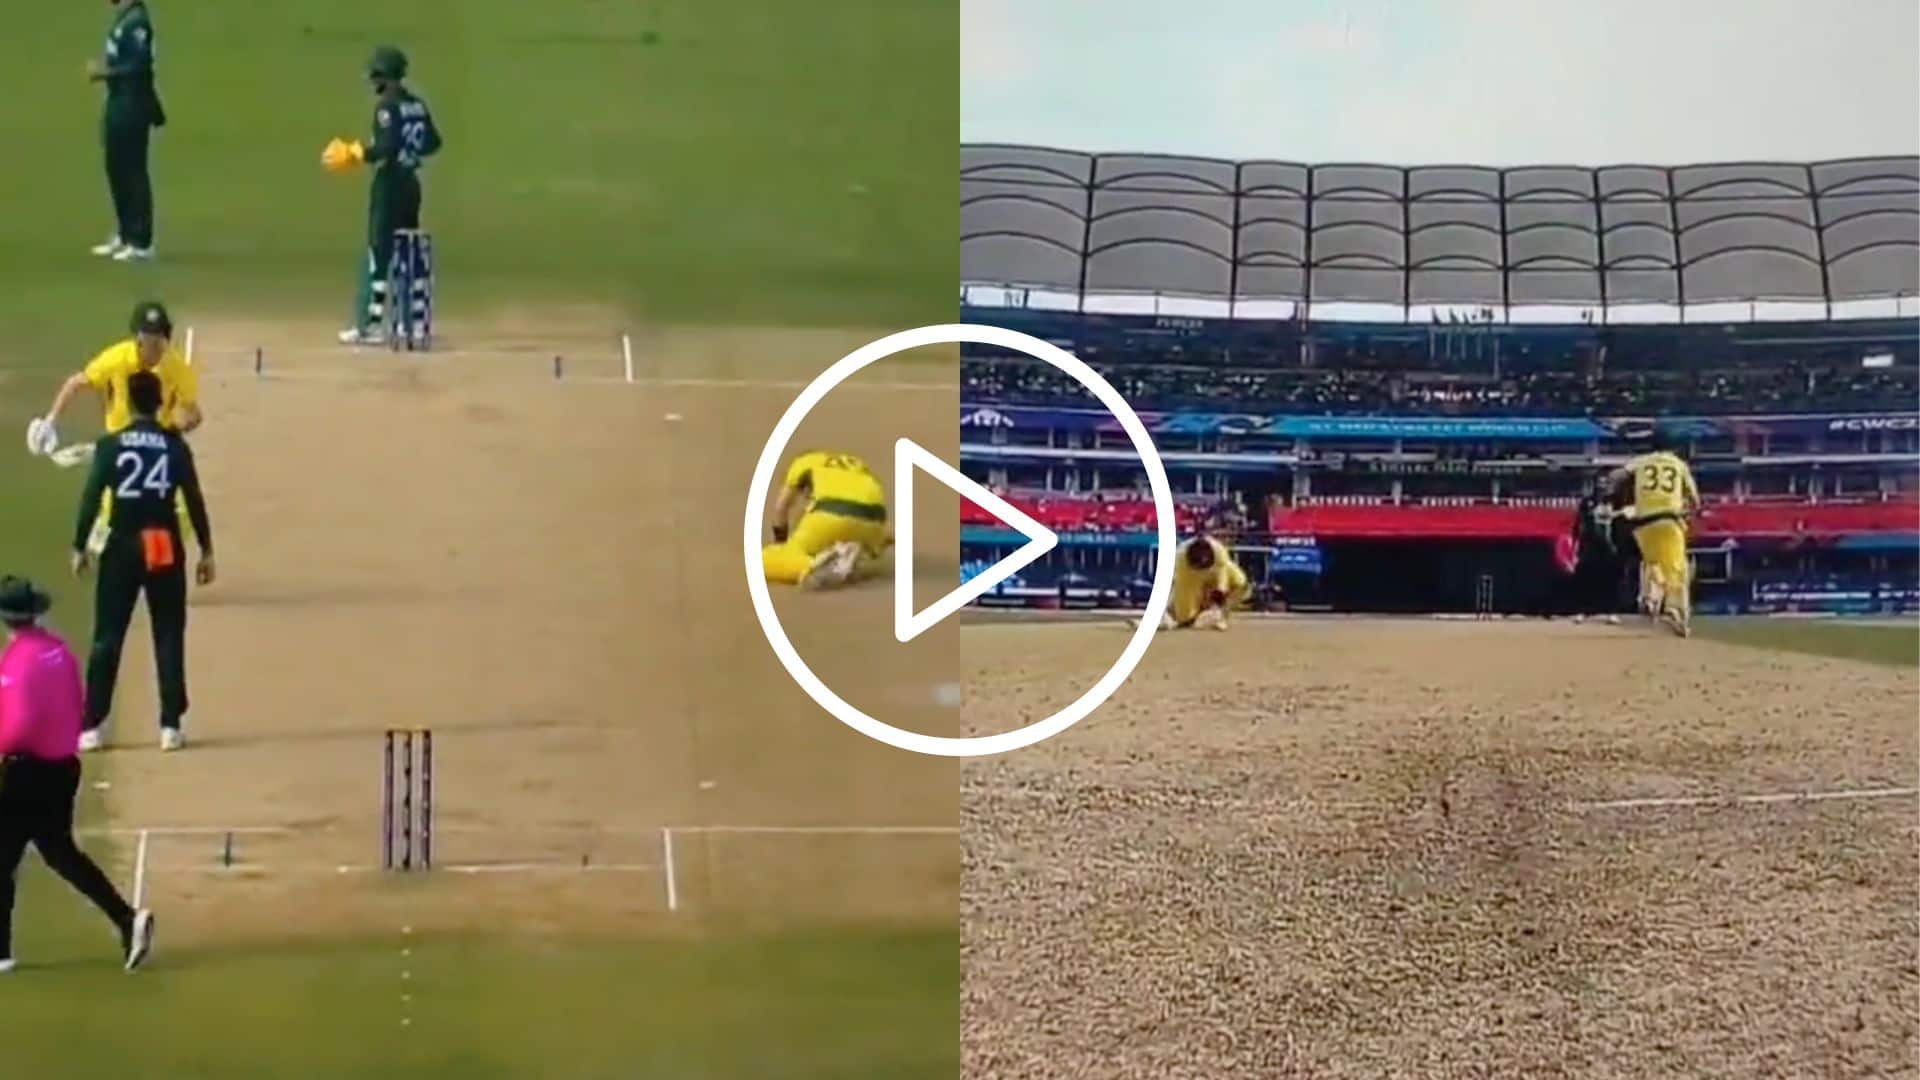 [Watch] Steve Smith Hilariously Falls In The Middle Of Pitch; Video Goes Viral